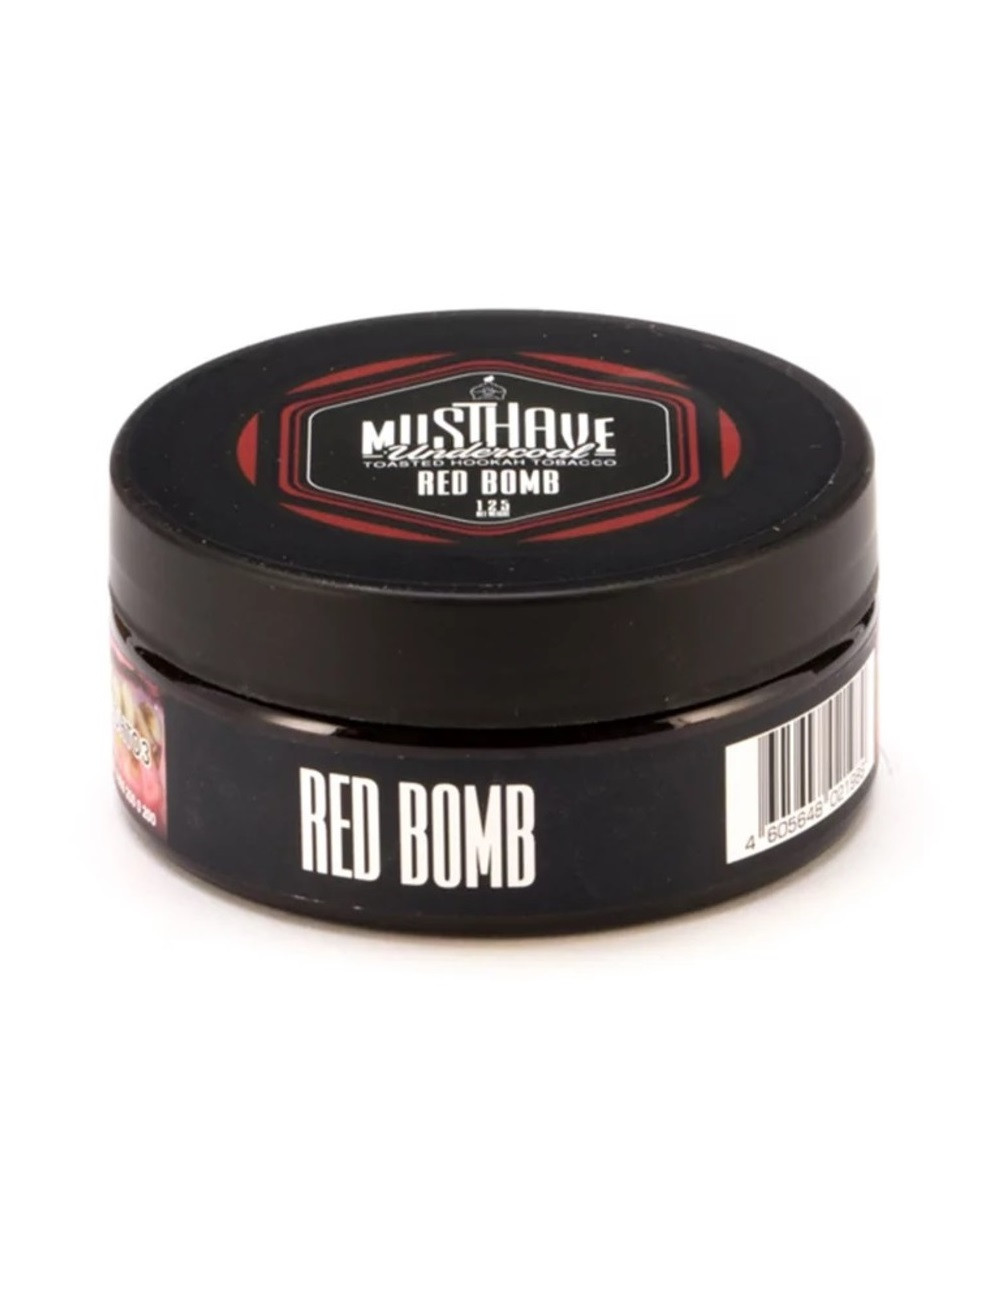 Red bomb